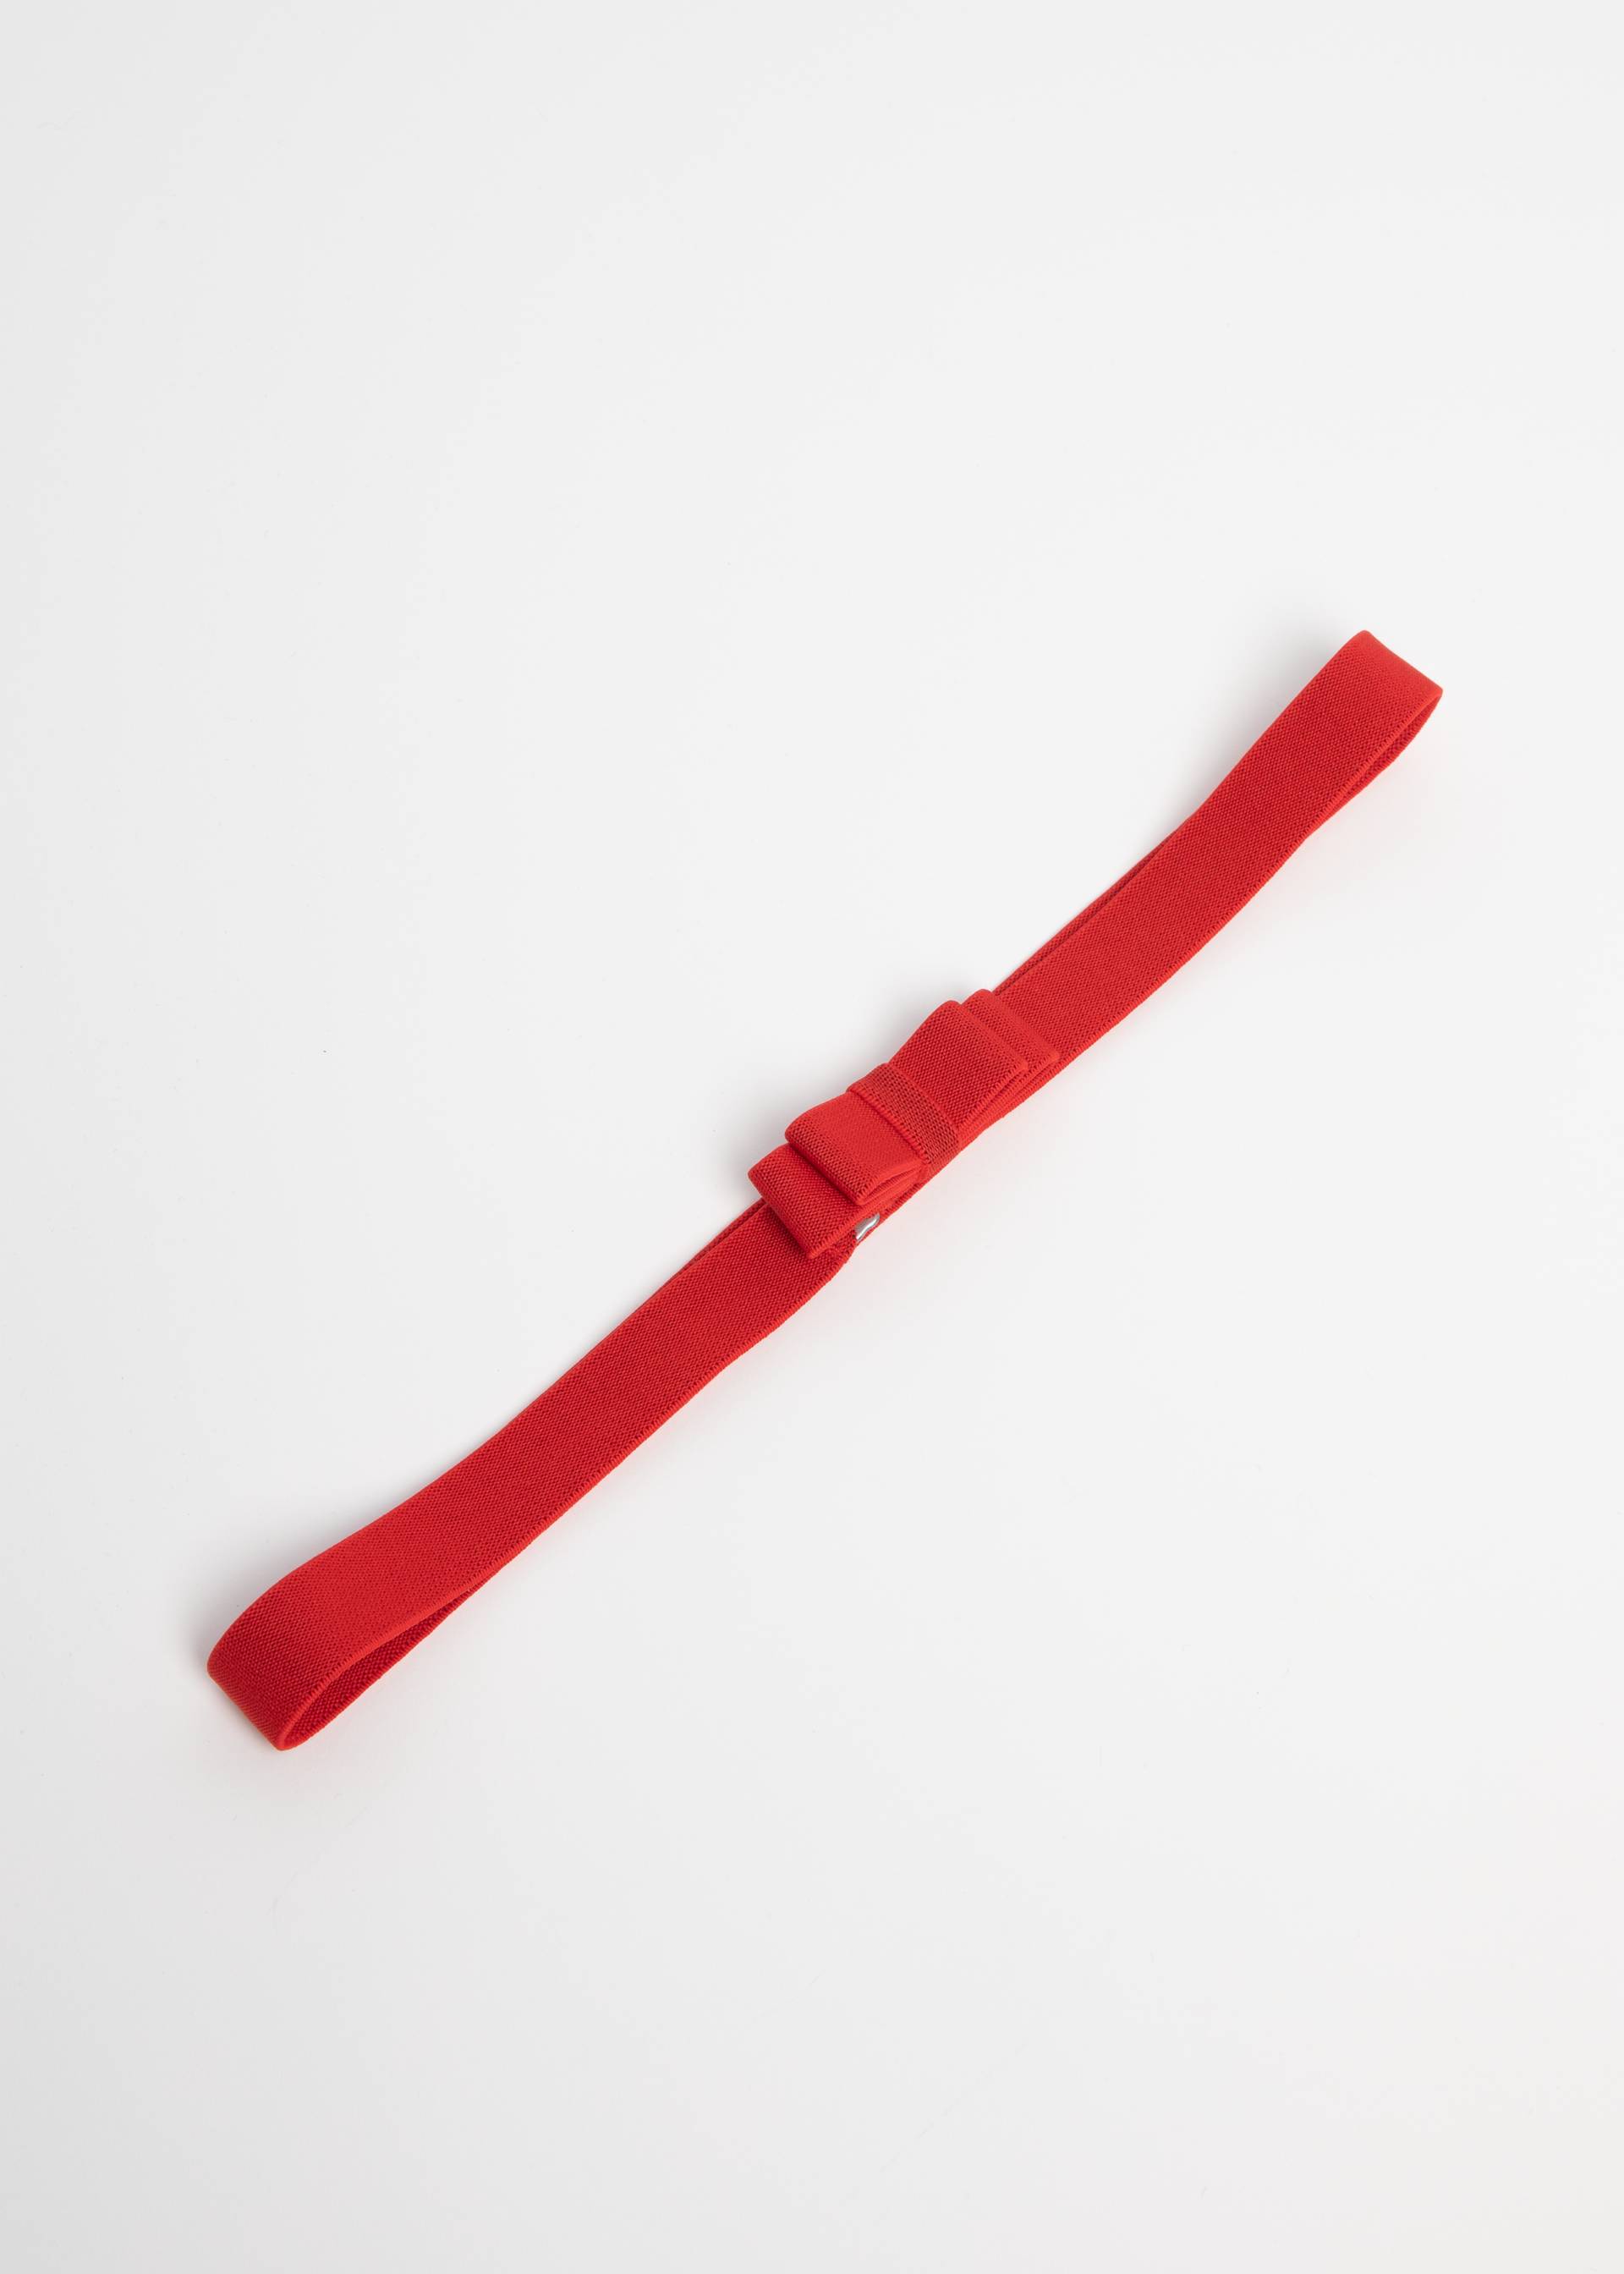 Waist belt Fantastic Elastic, powerful red, Accessoires, Red